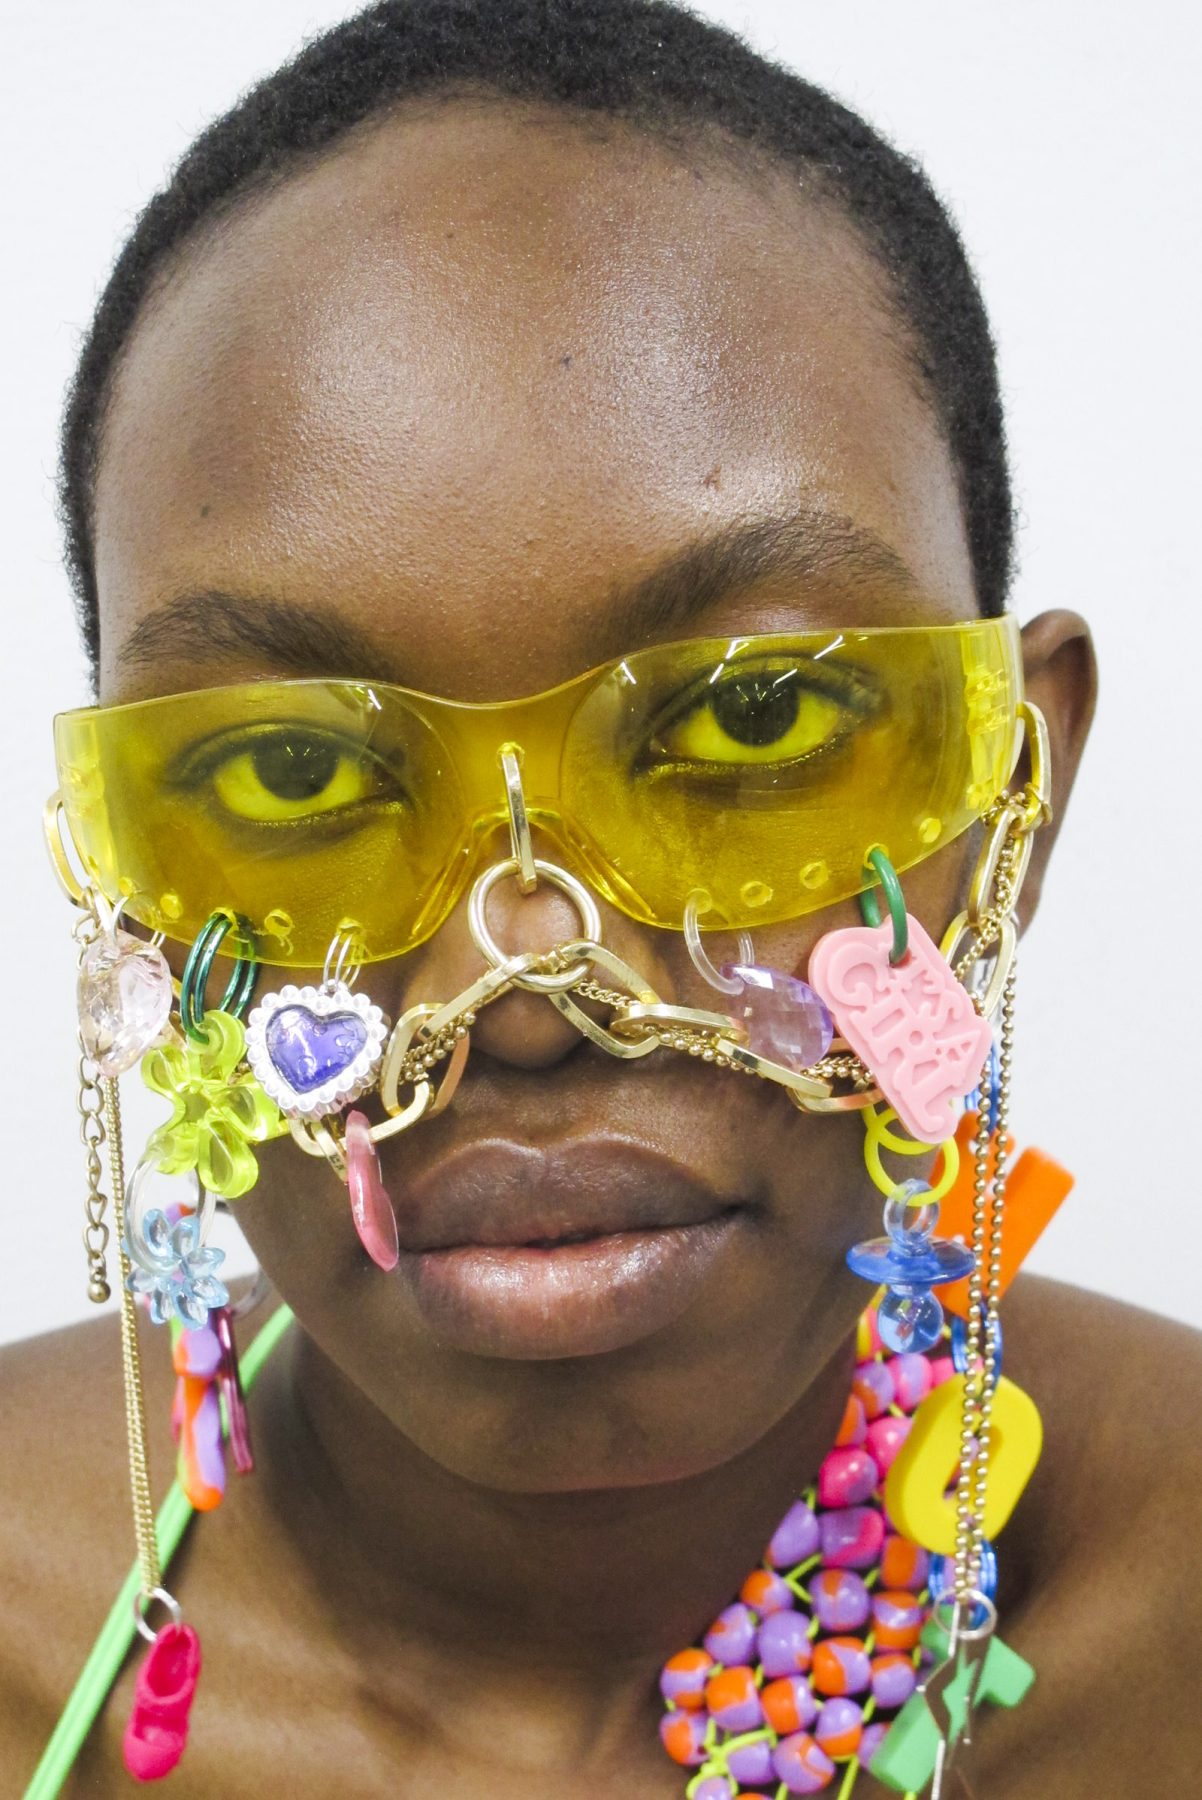 Close-up photo of model wearing decorated eyeglasses with chains and figures